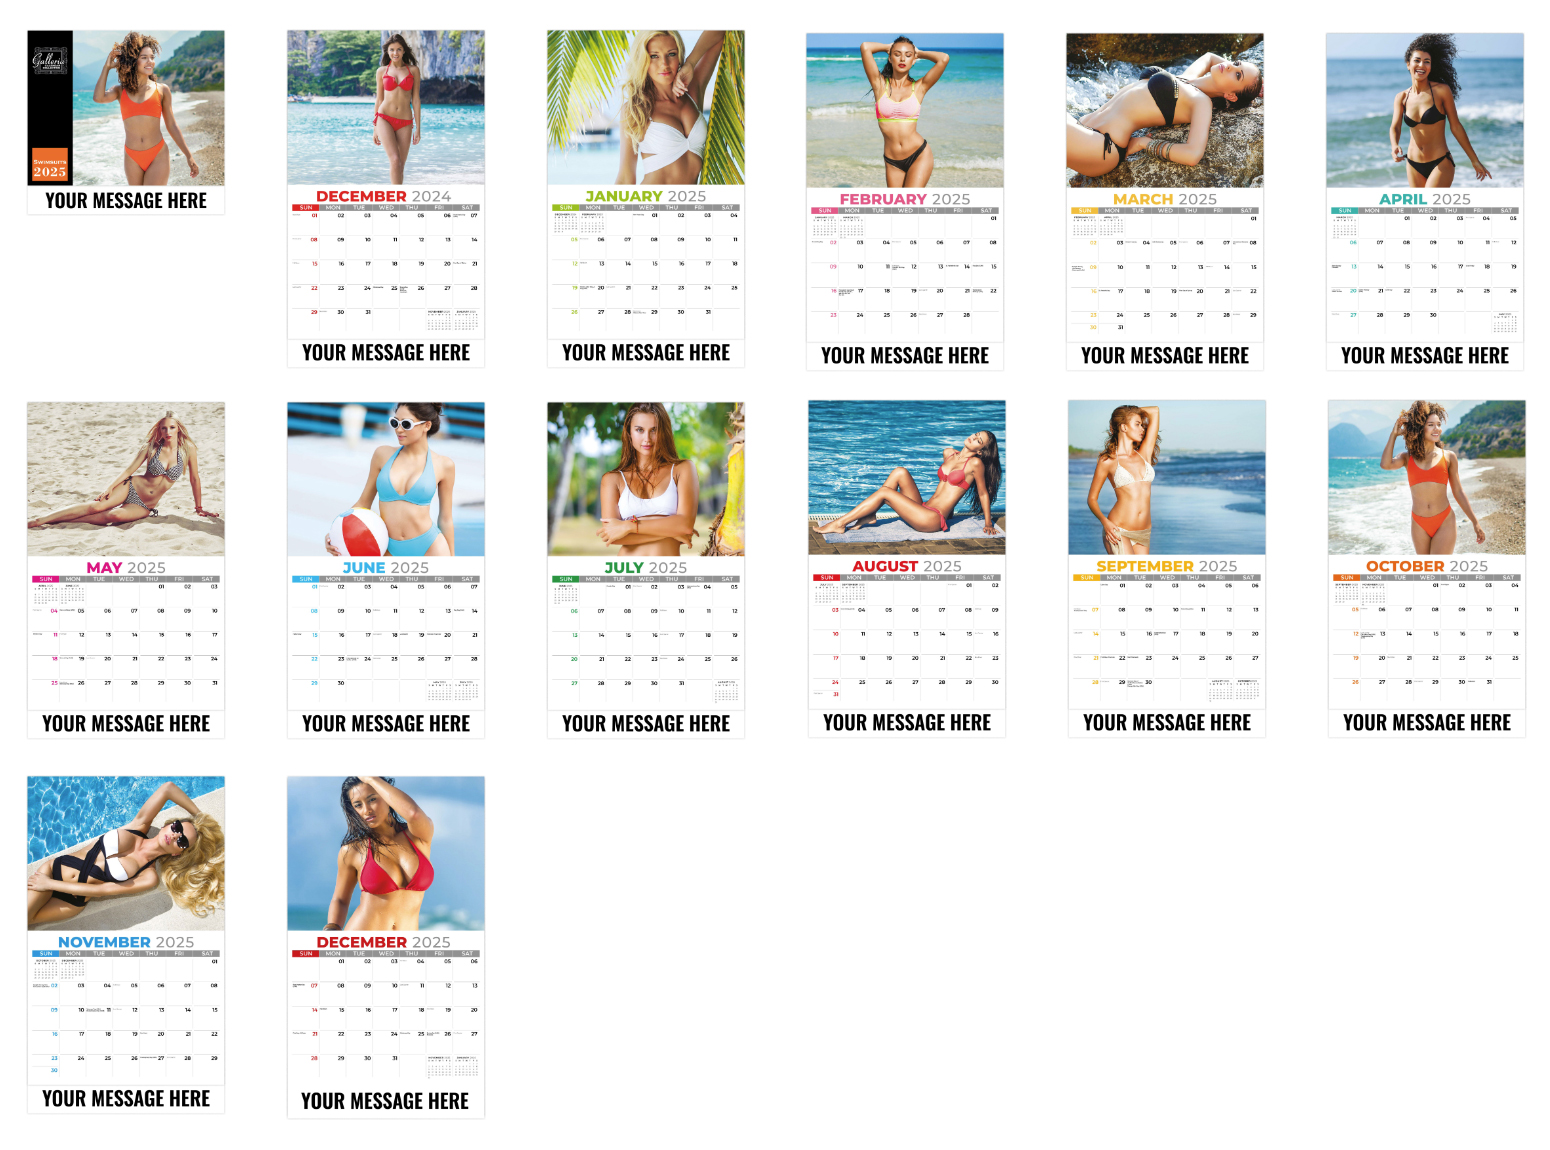 2024 Galleria Collection Swimsuit Models Calendar 105/8" x 181/2